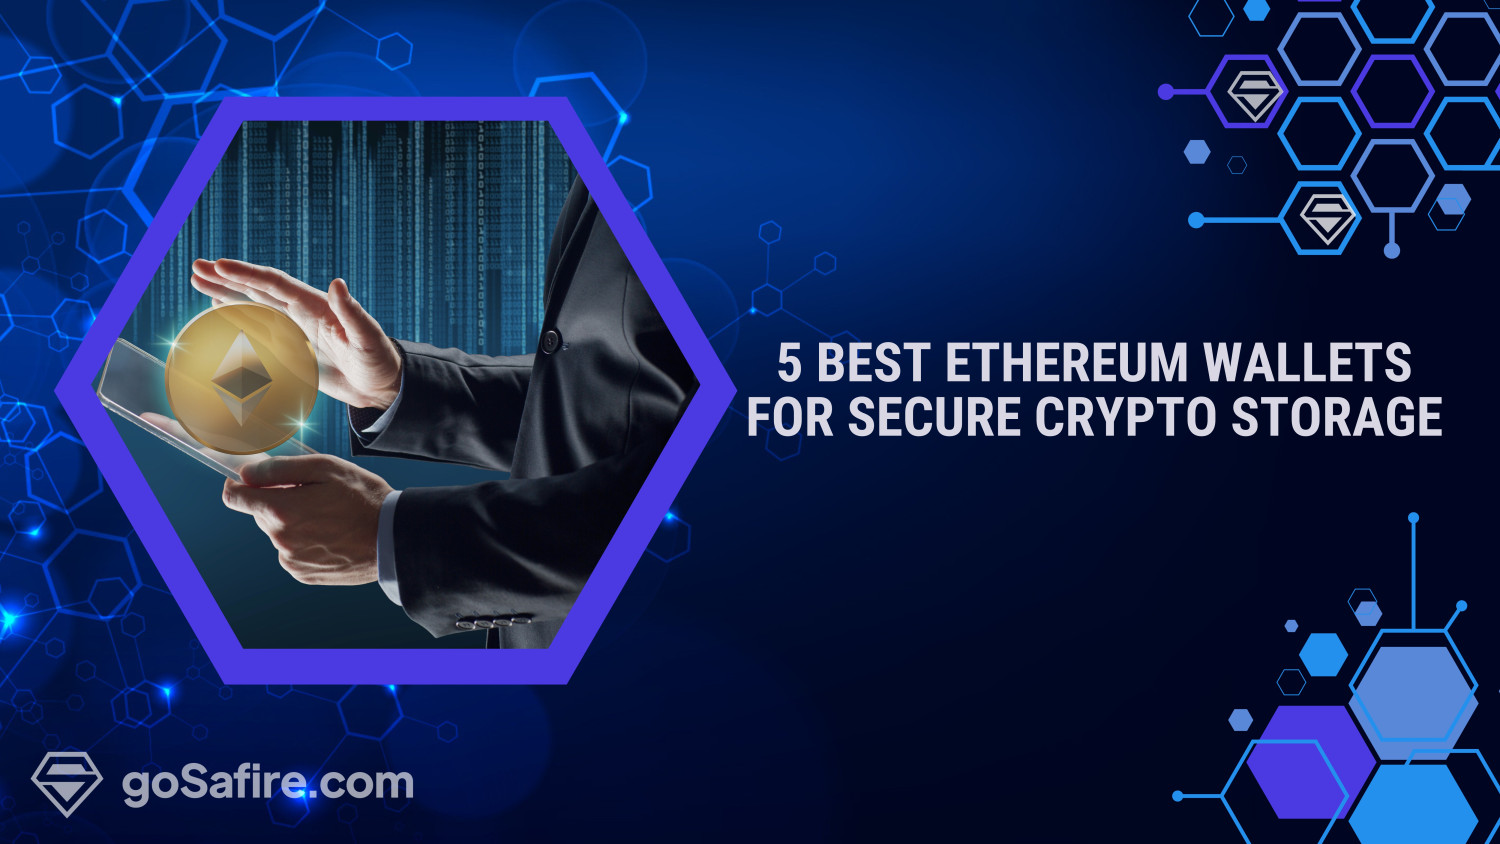 5 Best Ethereum Wallets for Secure Crypto Storage